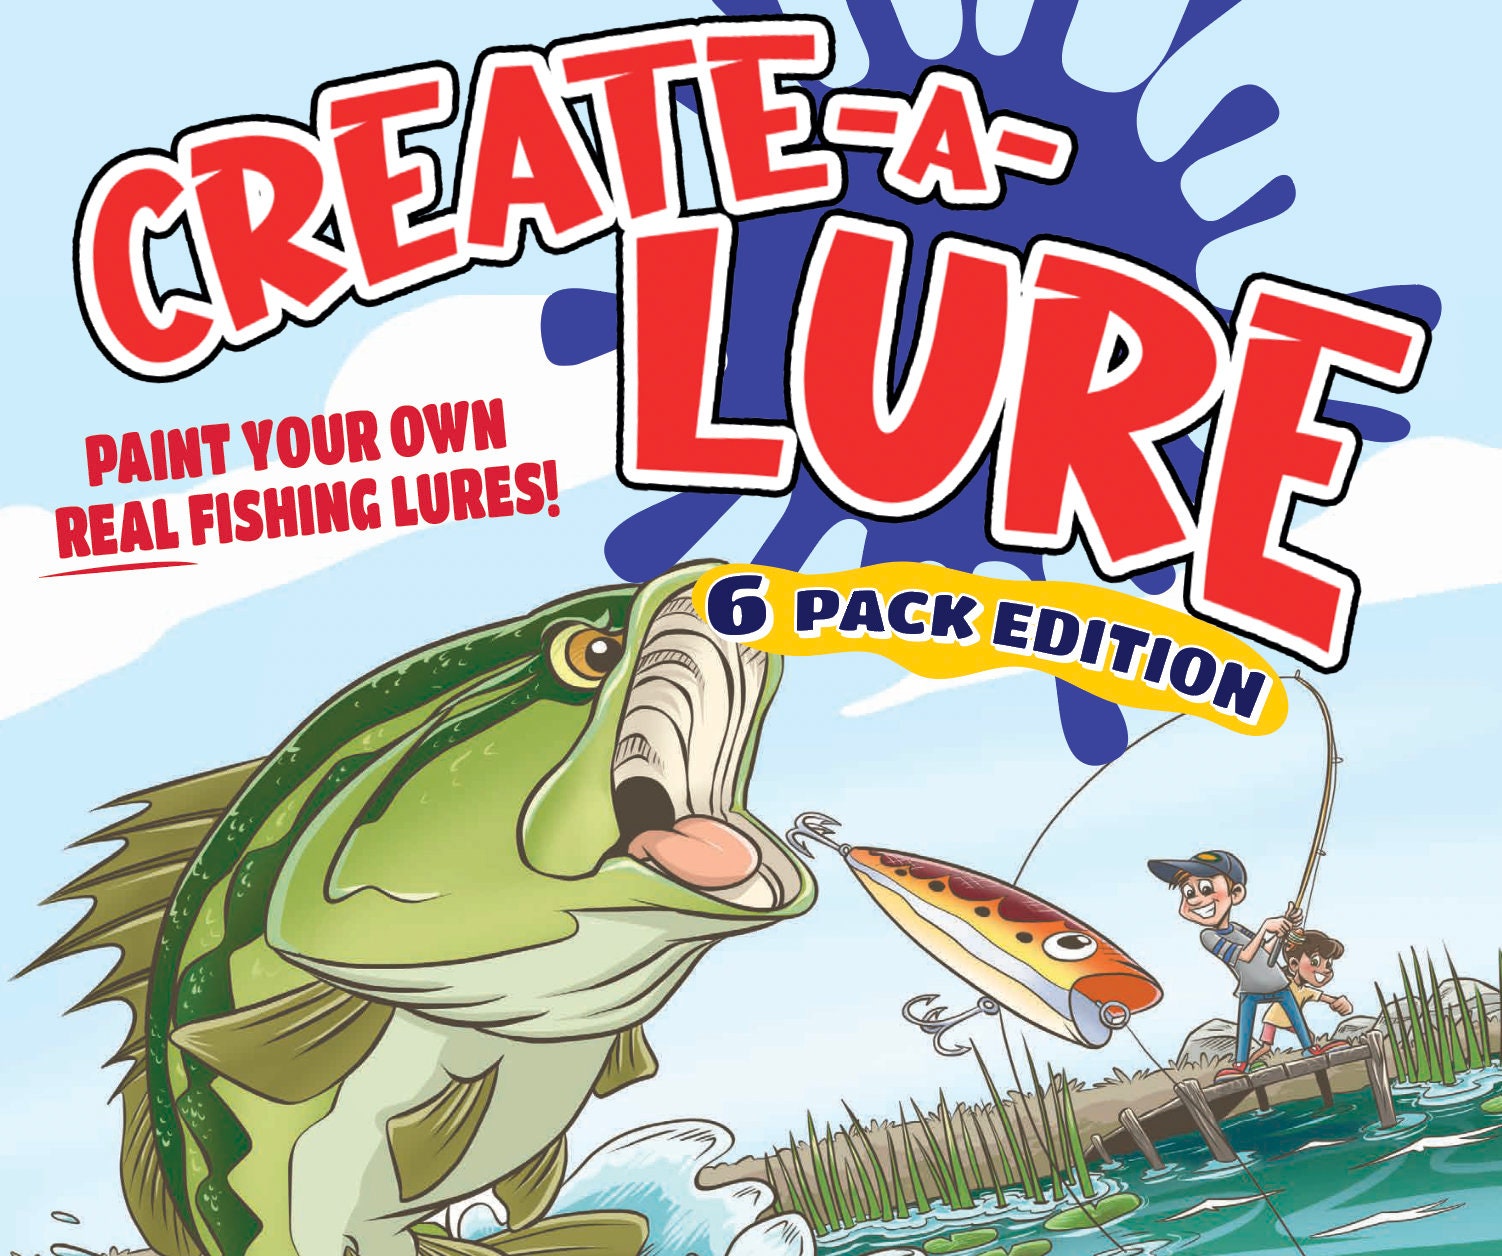 CREATE-A-LURE 6 Pack Edition 